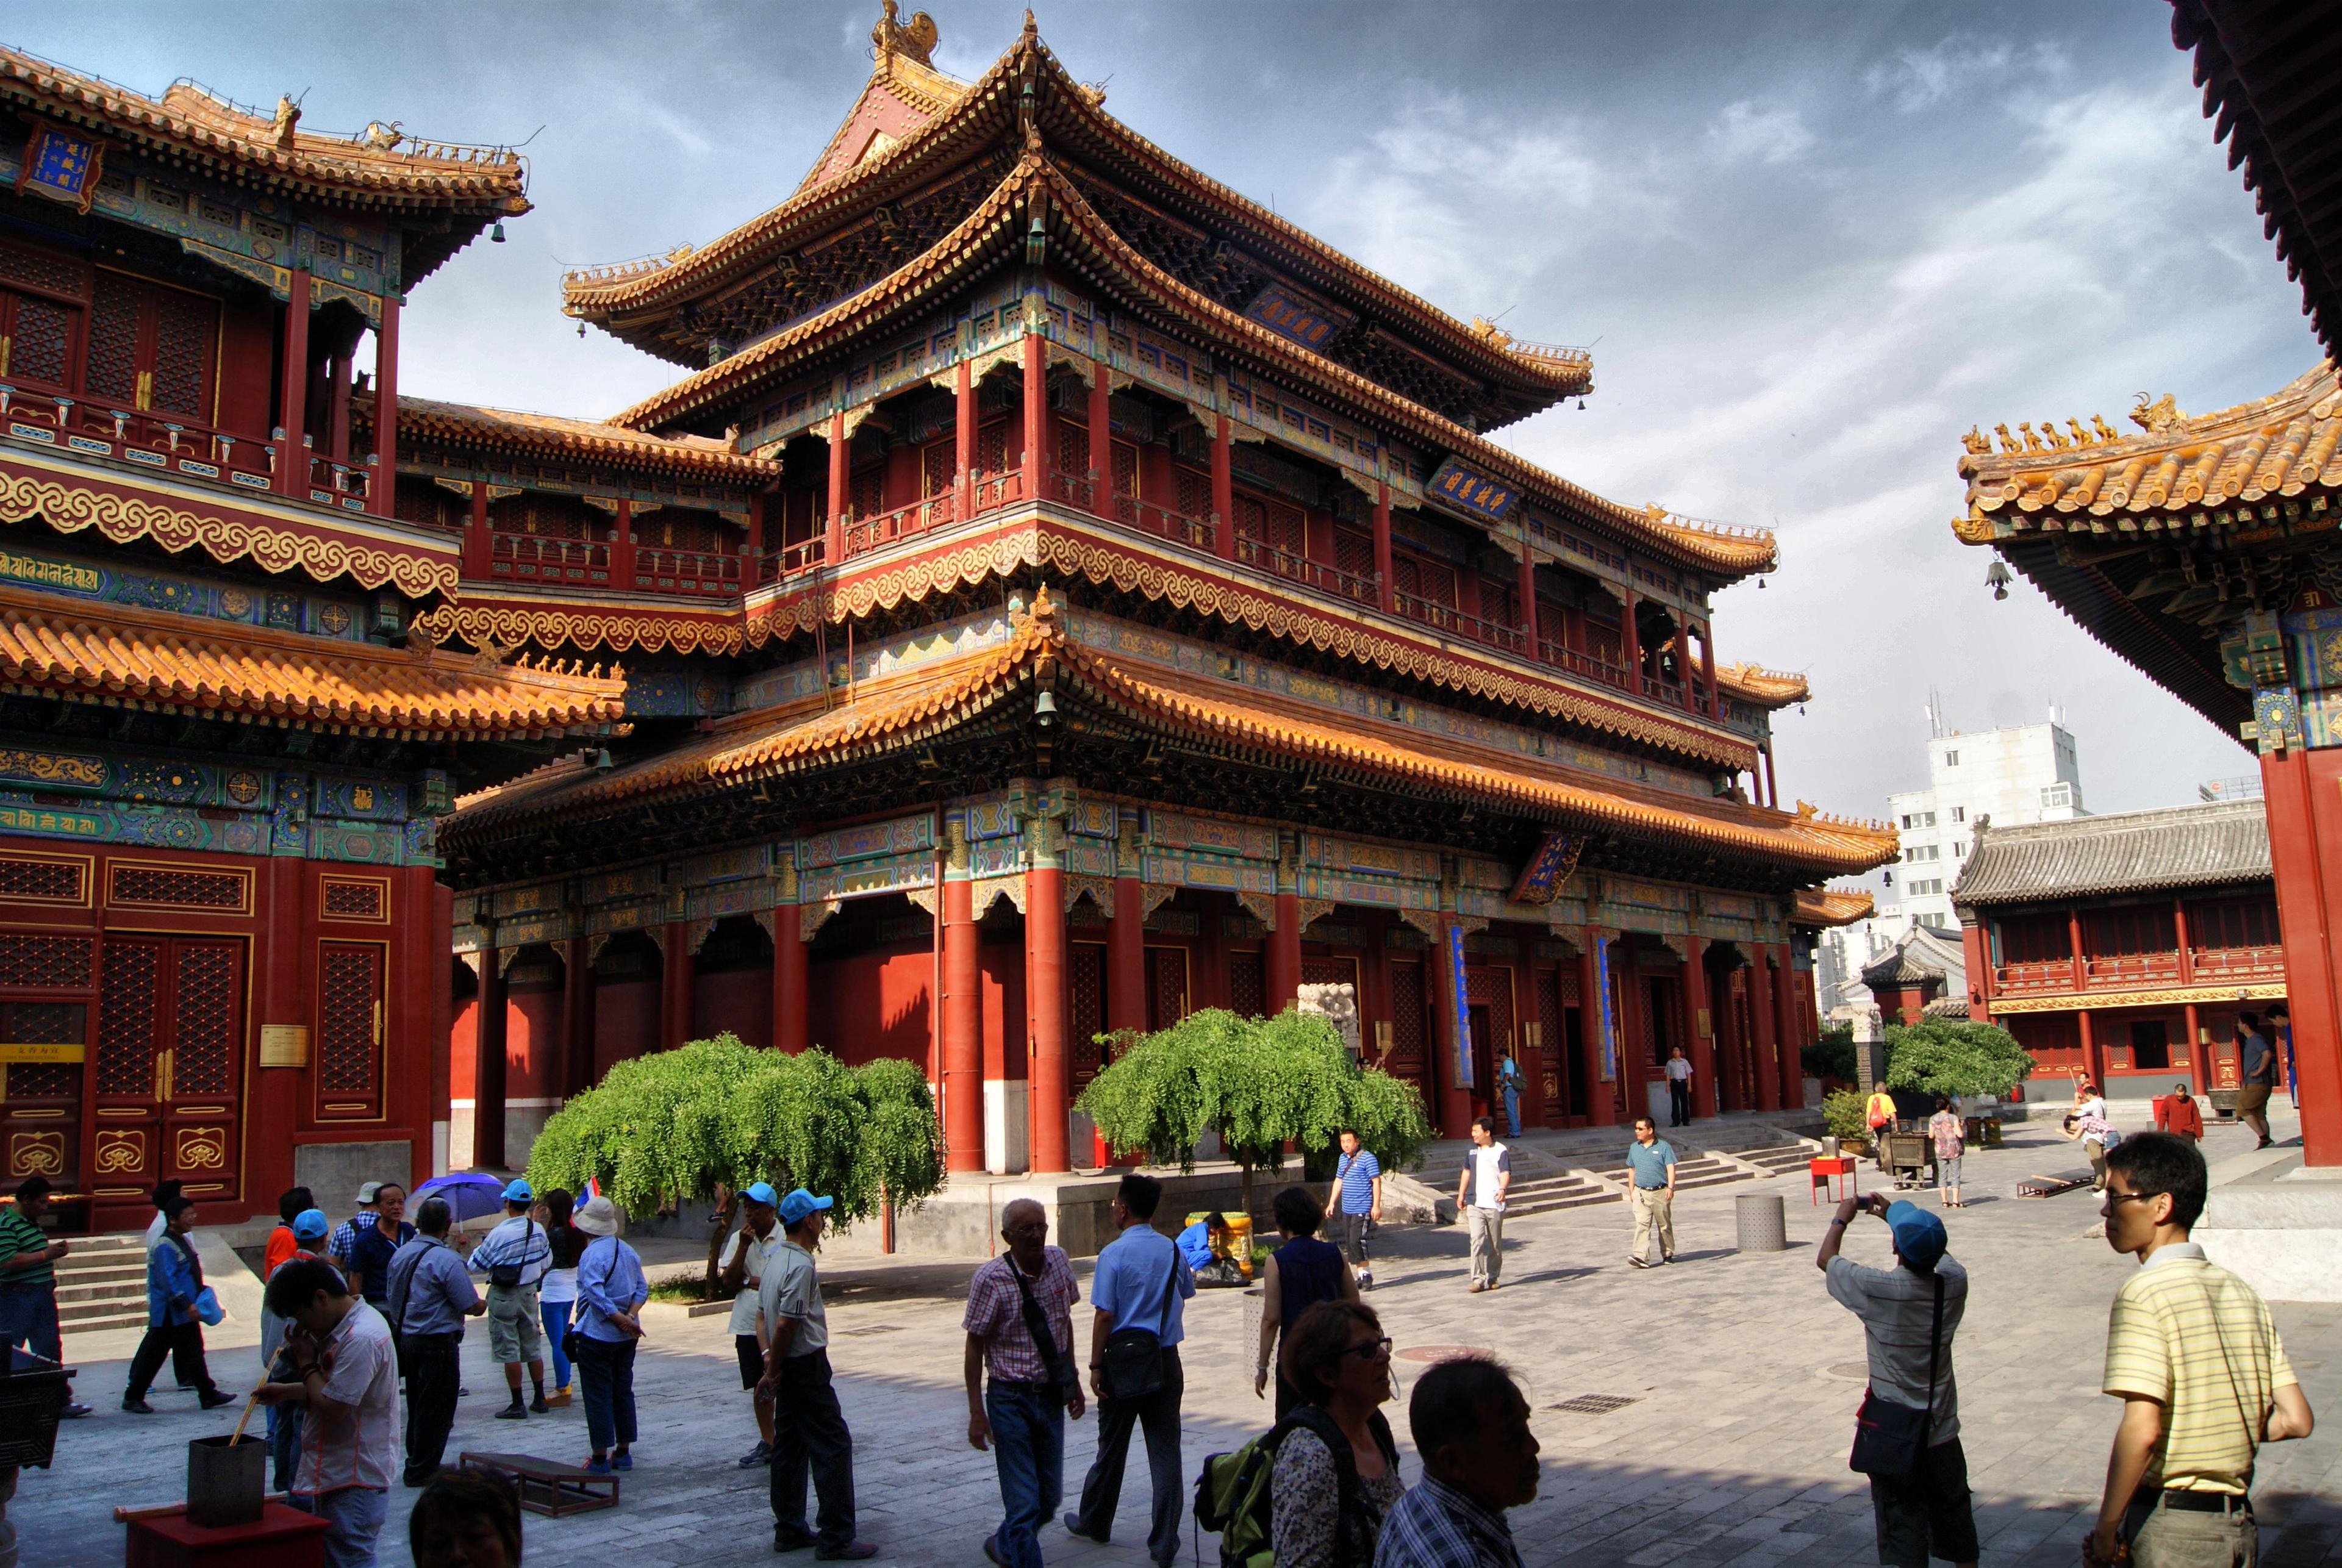 Cover image of this place Yonghegong Lama Temple (雍和宫)